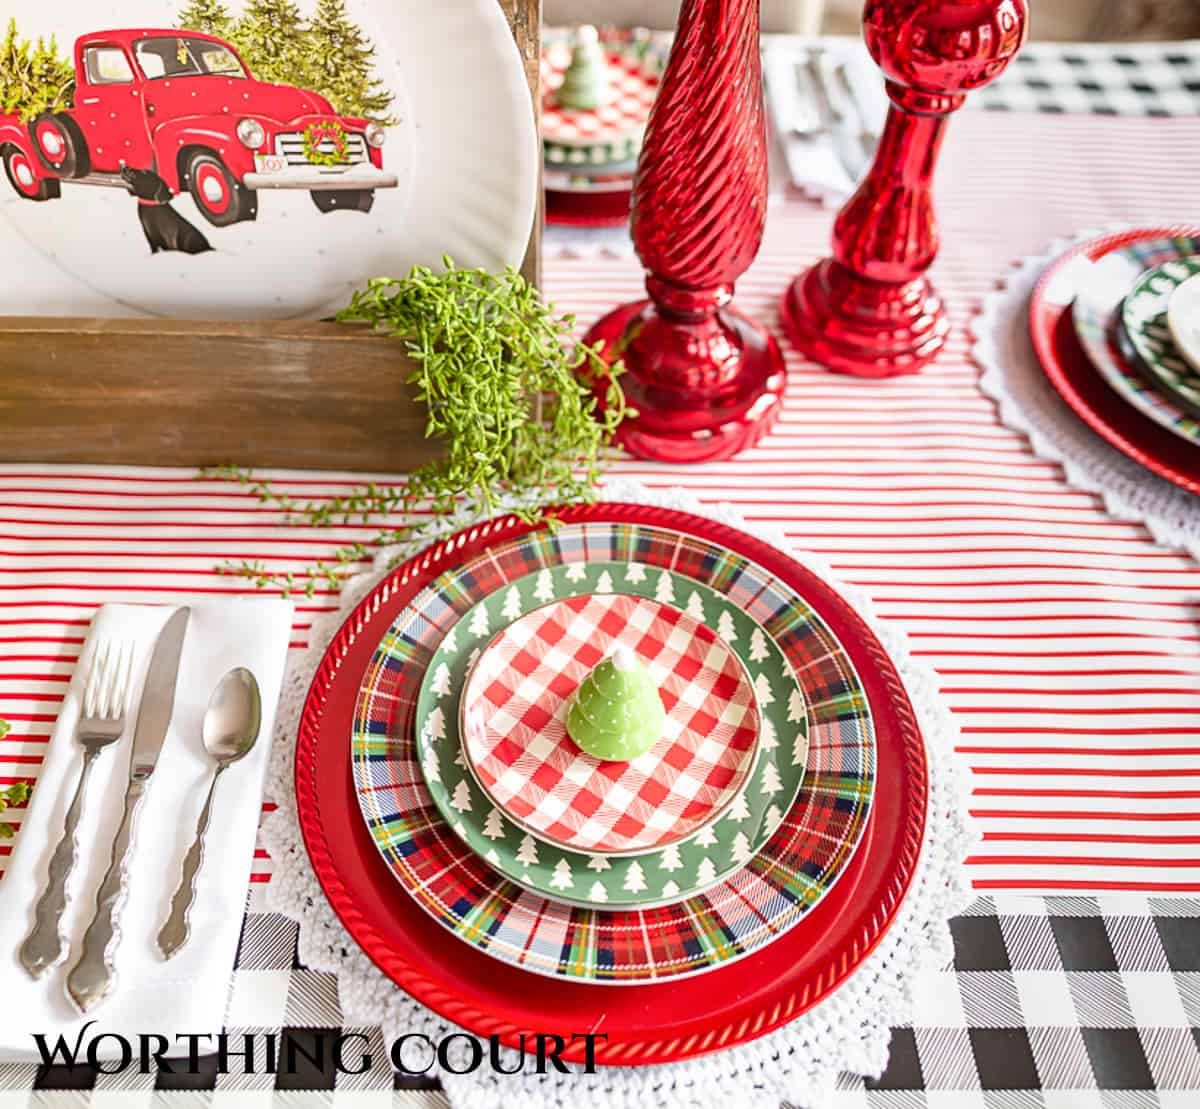 Christmas place setting with red, white, green and tartan plaid dishes